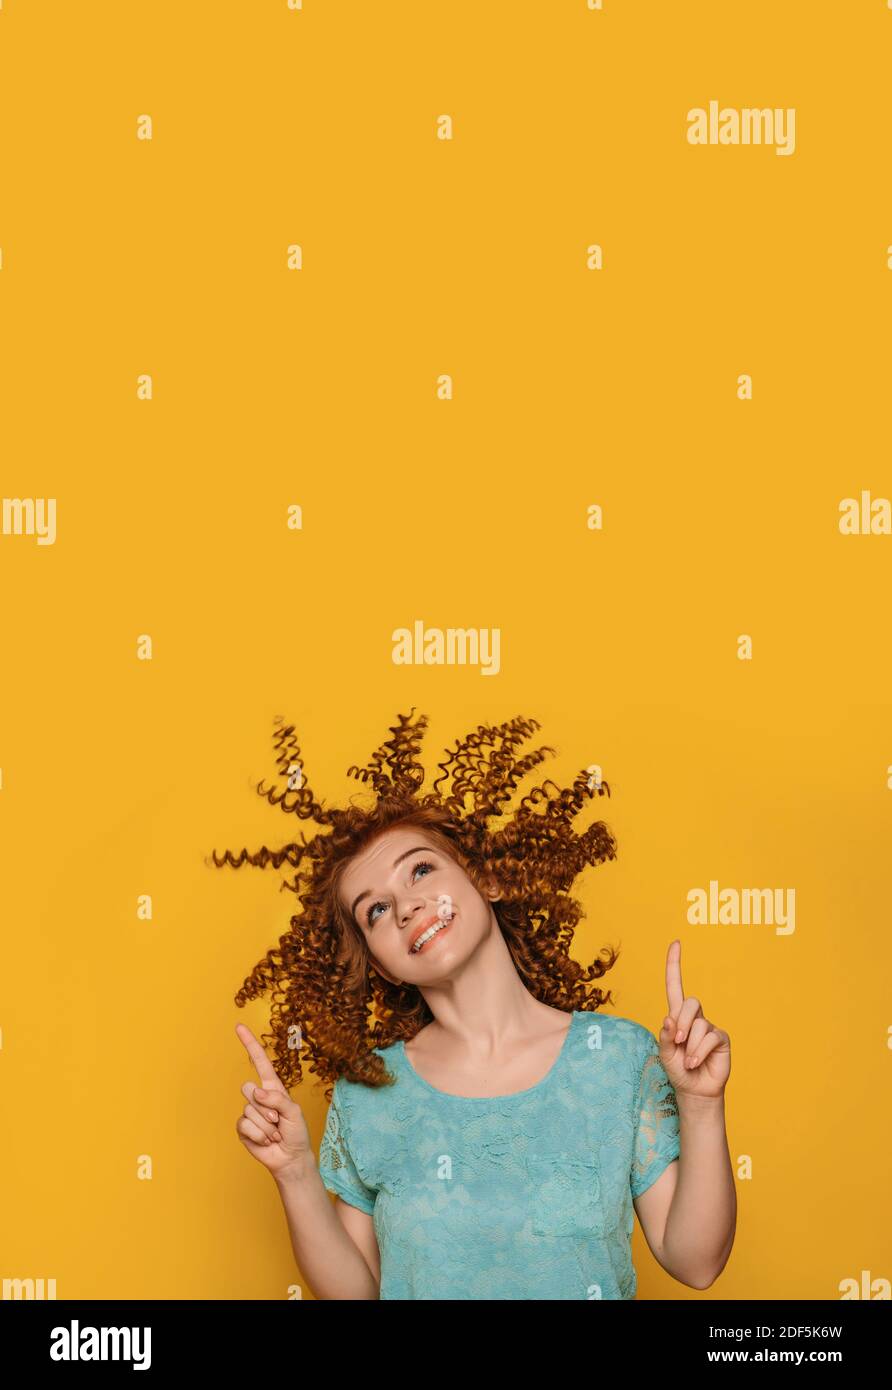 Emotional woman with curls pointing hands up, on empty space over fortuna gold background Stock Photo